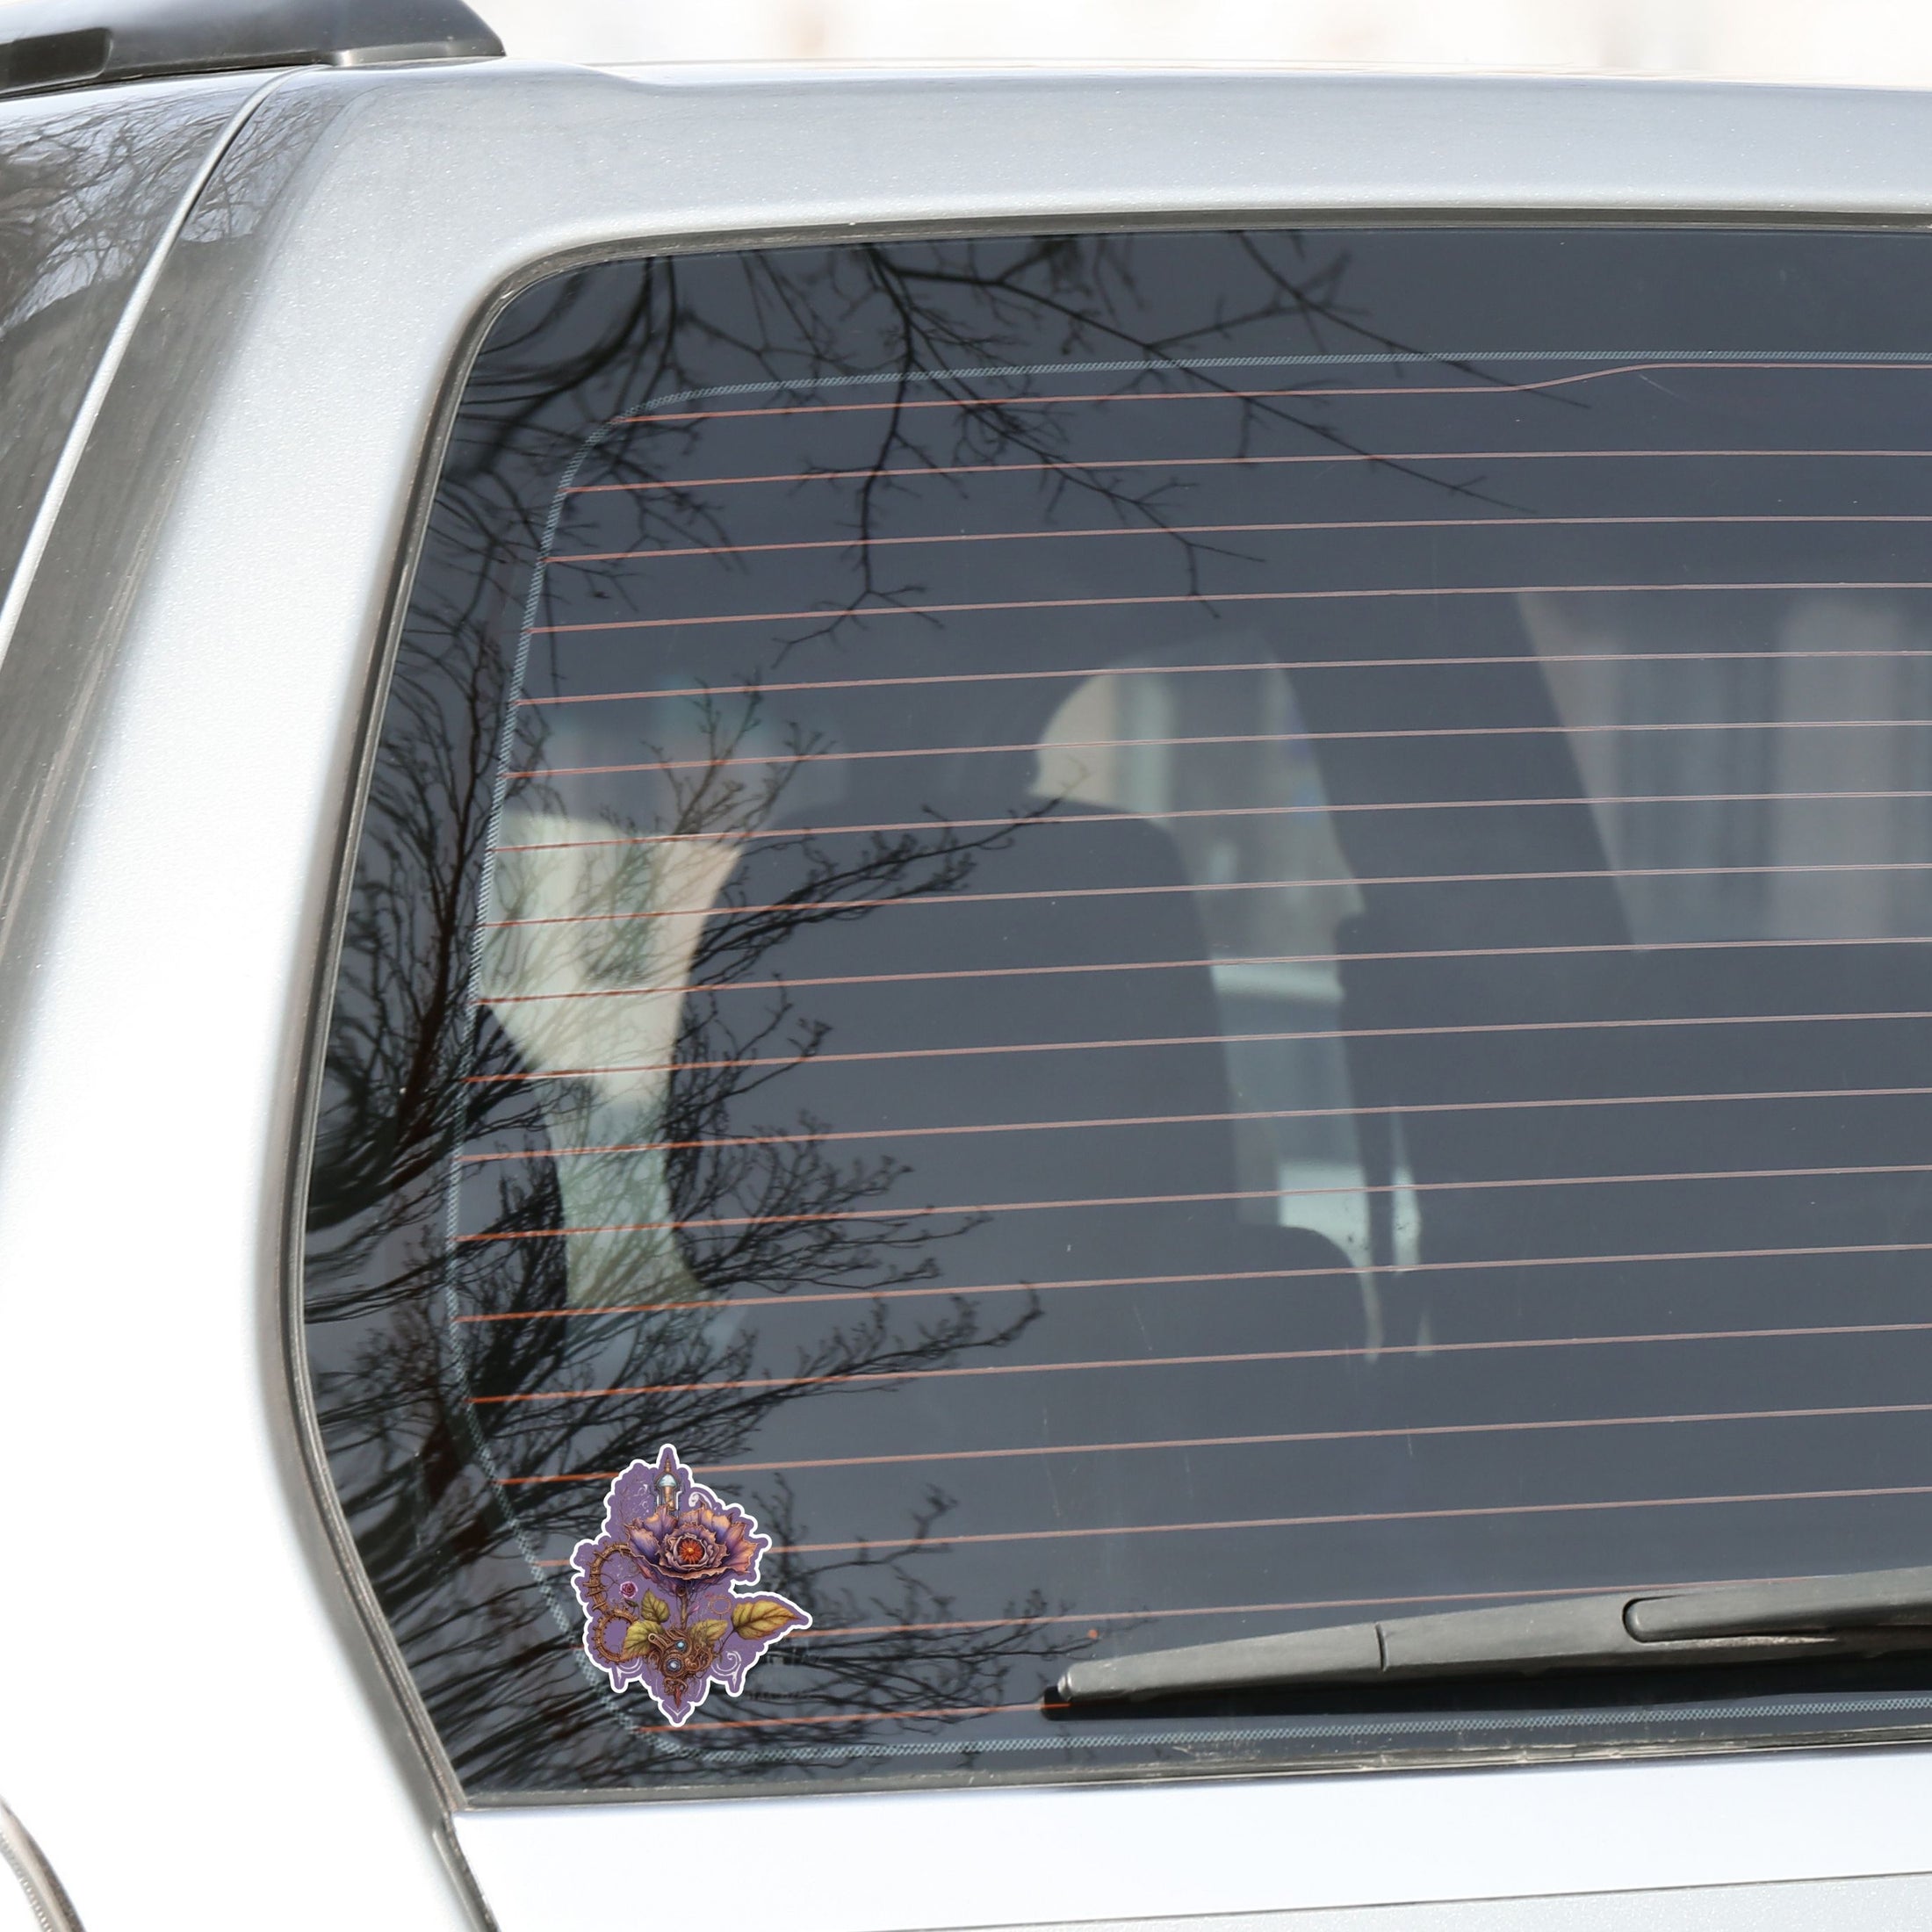 This image shows the steampunk rose sticker on the back window of a car.